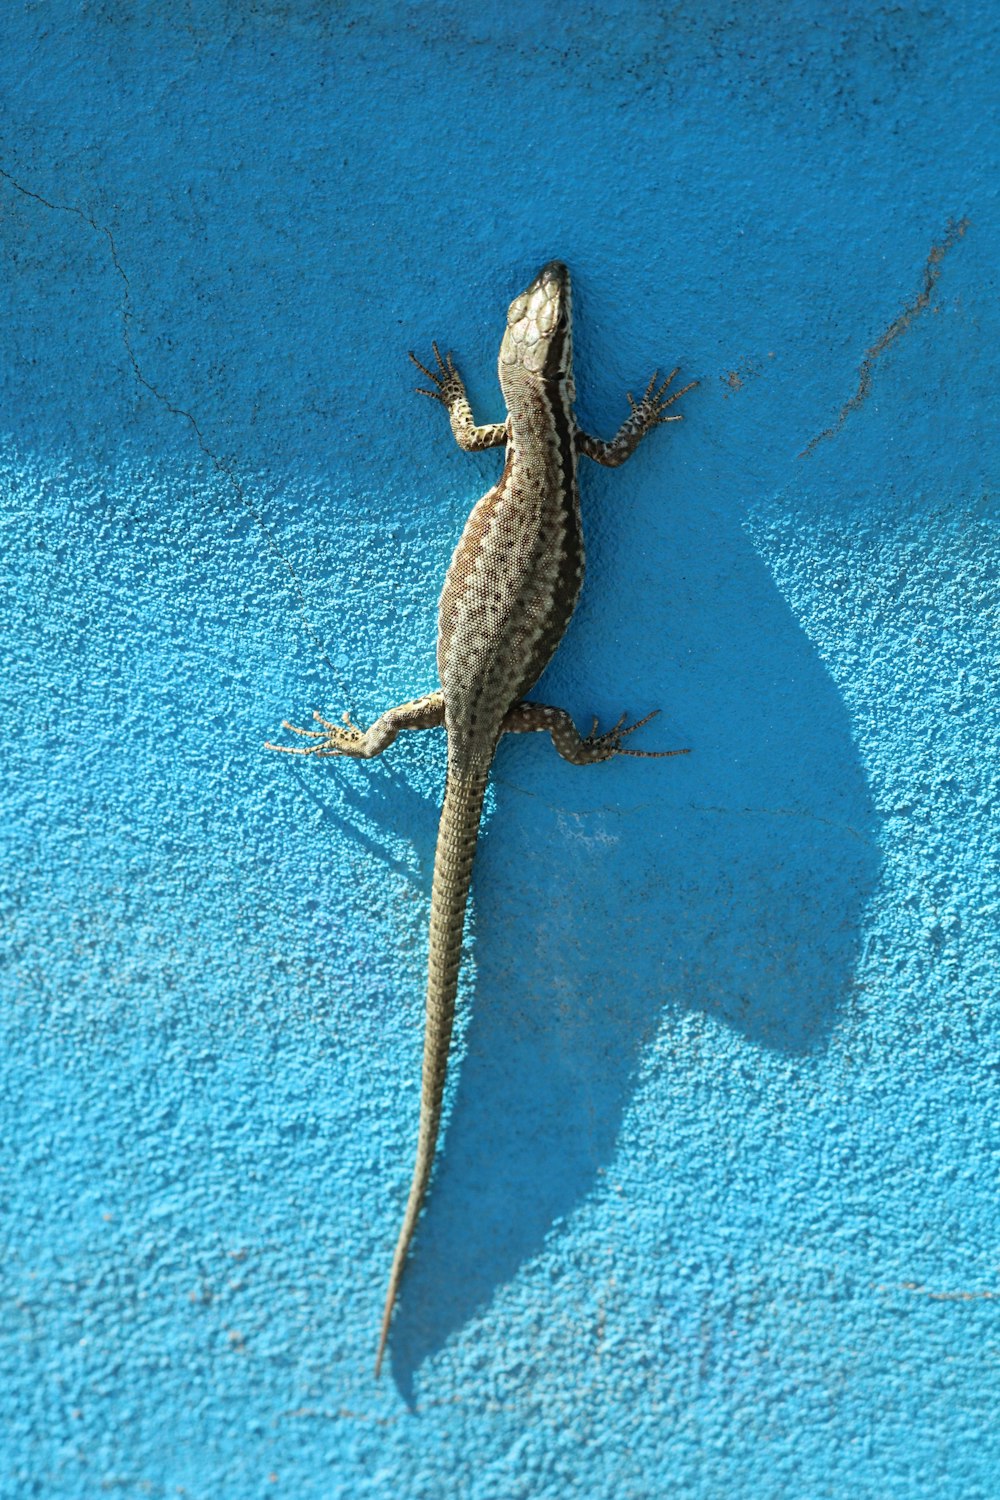 brown and black lizard on blue painted wall